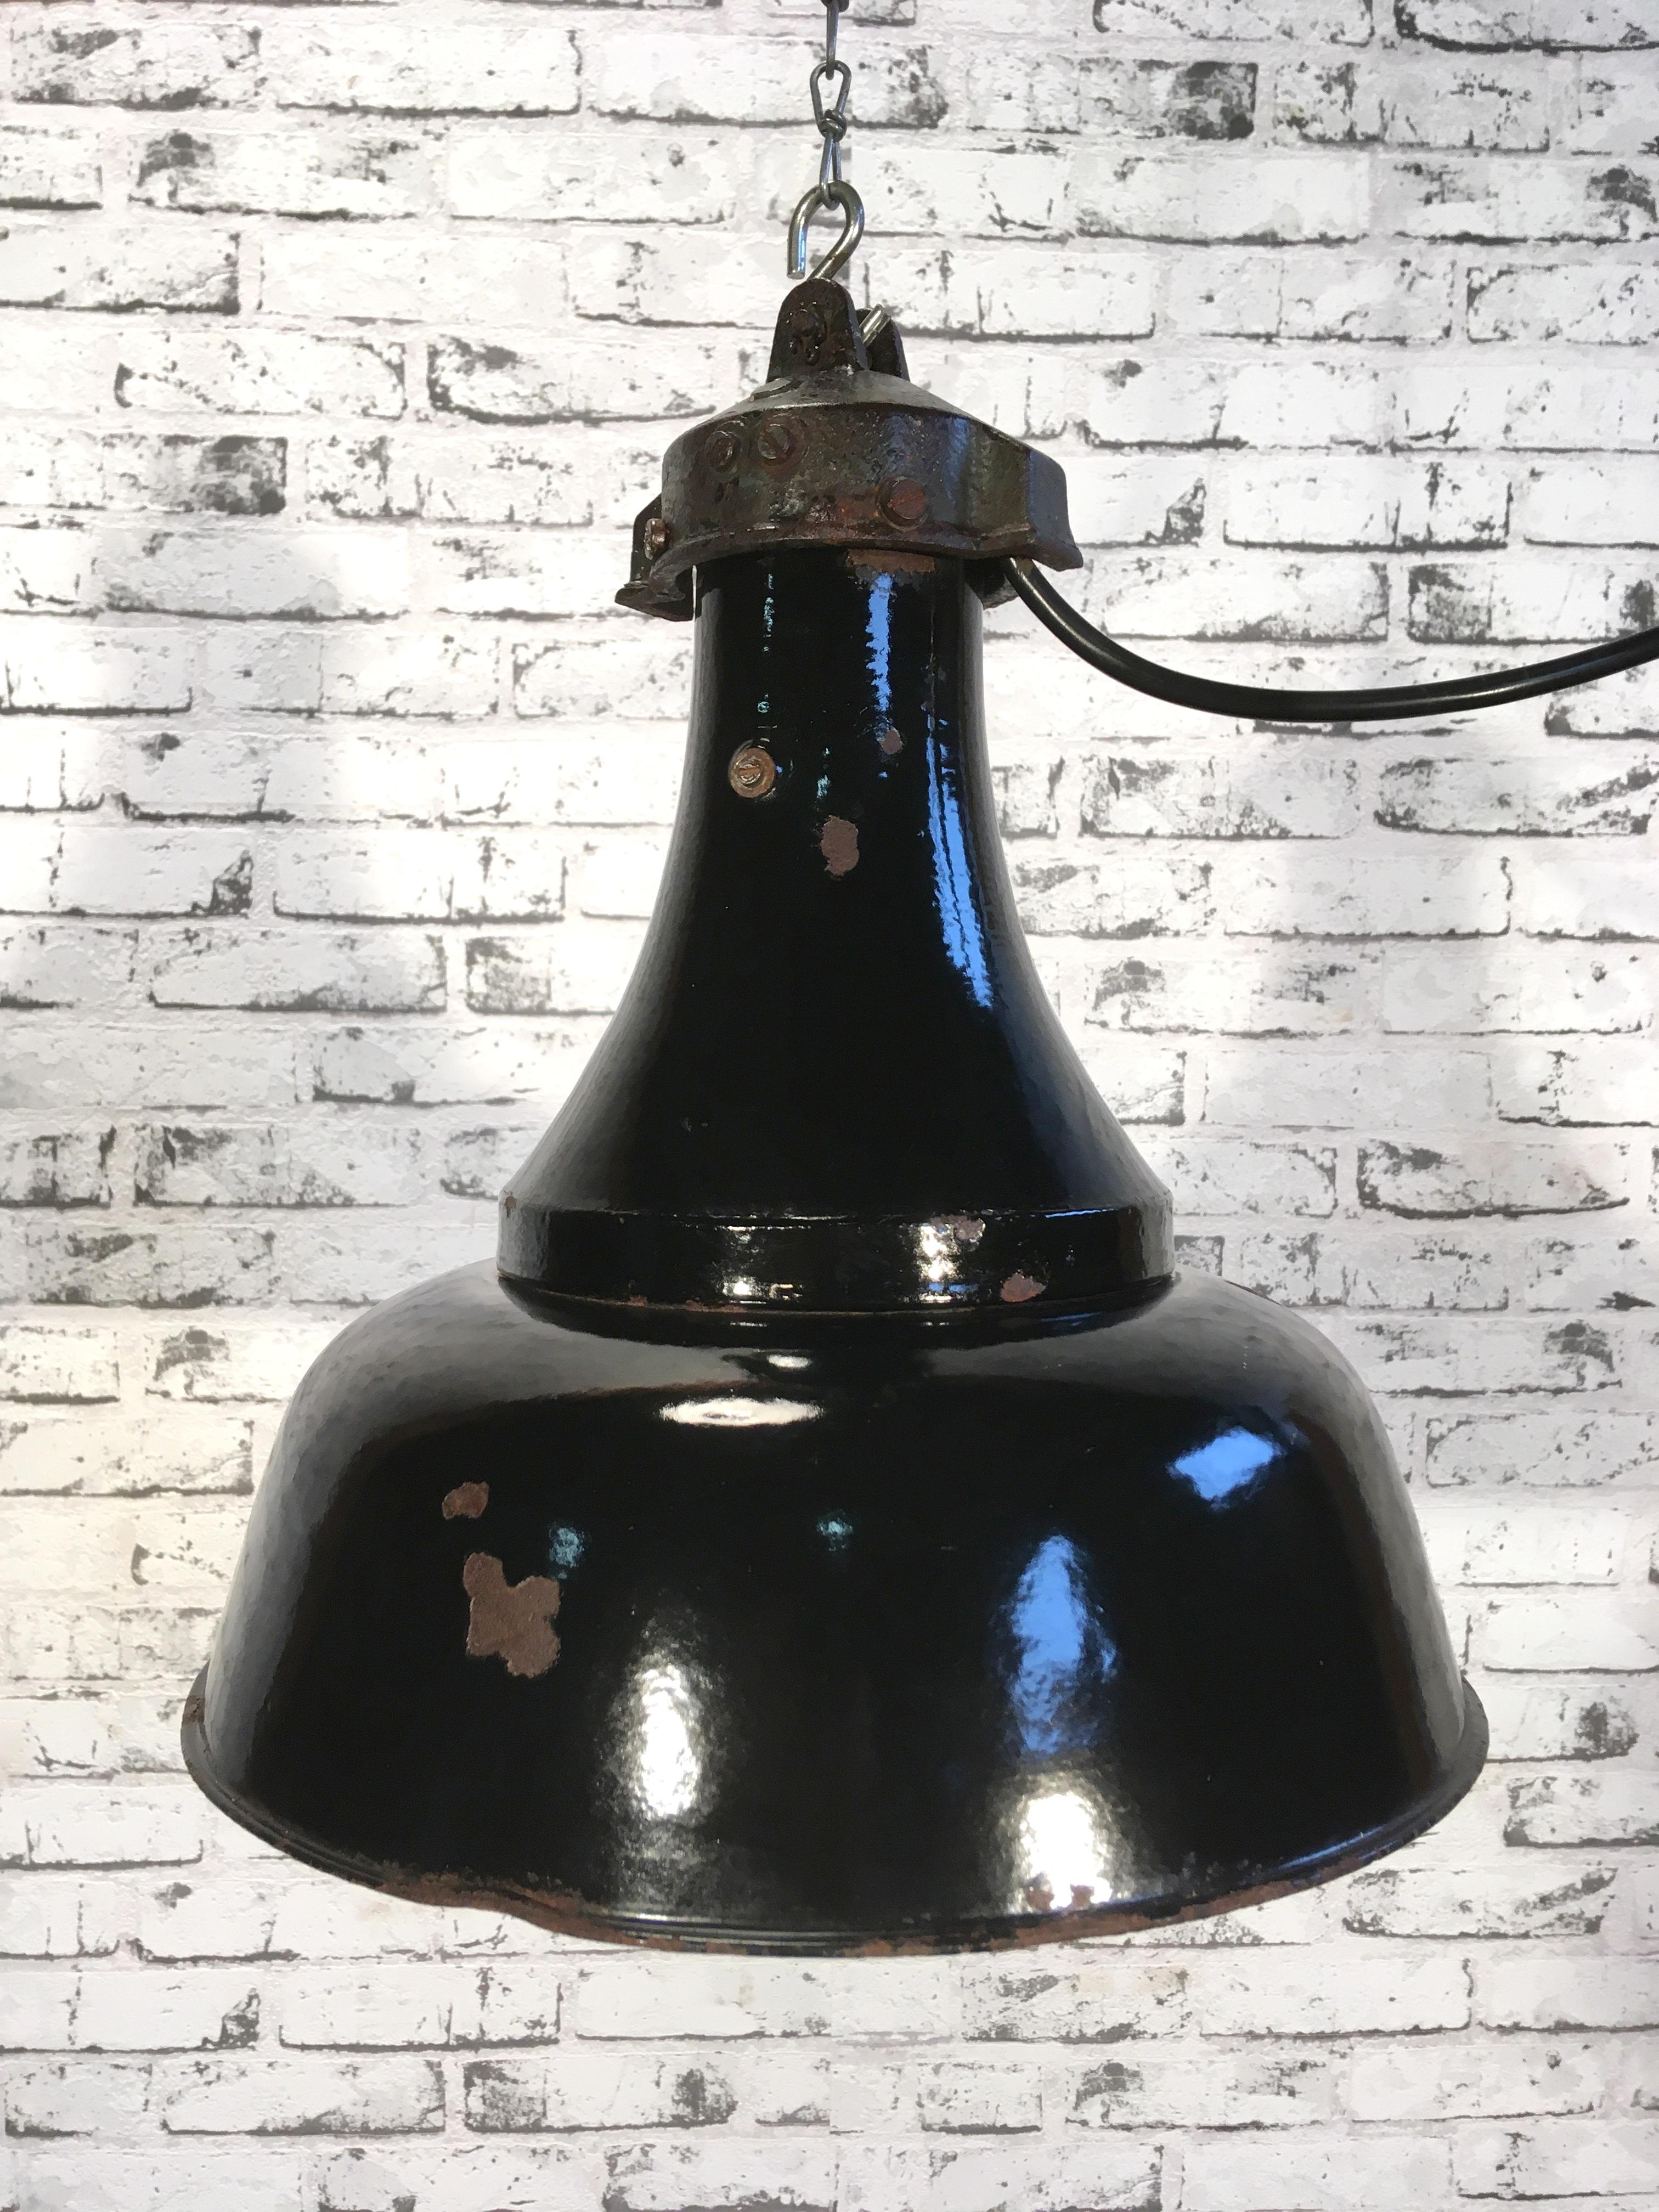 Very old industrial pendant lamp. Used in factories in former Czechoslovakia, 1920s, black enamel. Cast Iron top. New wiring and new porcelain E 27 socket. Weight: 2 kg.